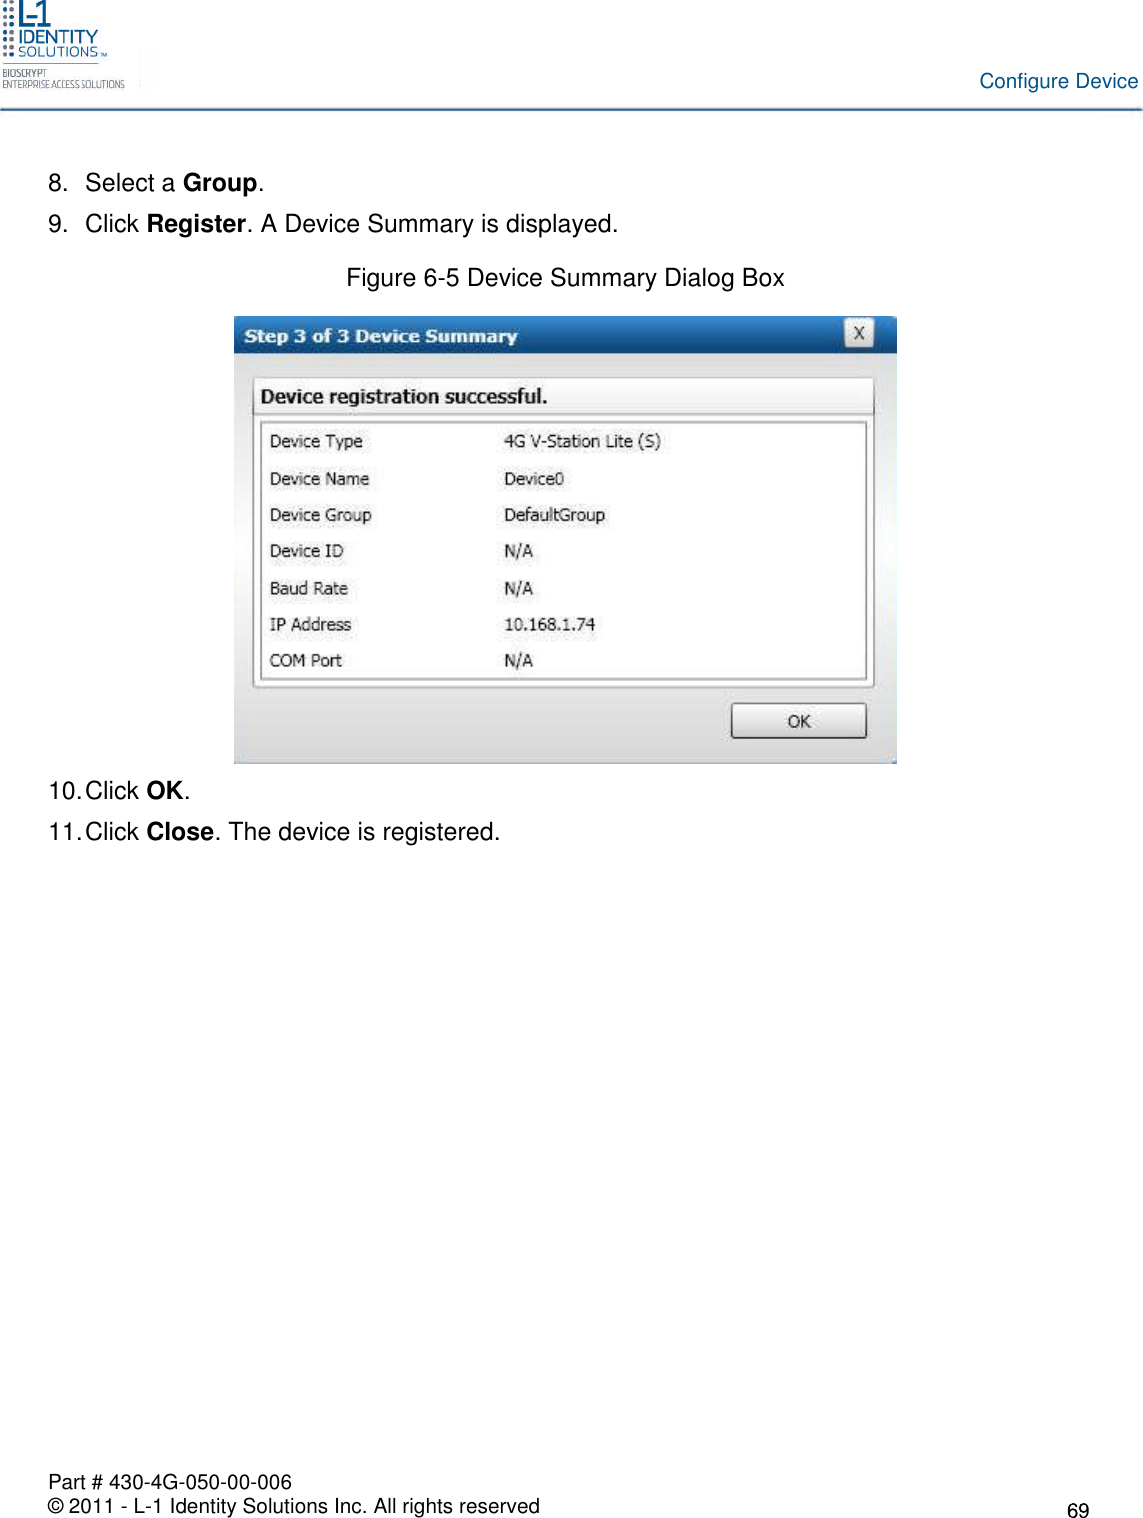 Part # 430-4G-050-00-006© 2011 - L-1 Identity Solutions Inc. All rights reservedConfigure Device8. Select a Group.9. Click Register. A Device Summary is displayed.Figure 6-5 Device Summary Dialog Box10.Click OK.11.Click Close. The device is registered.